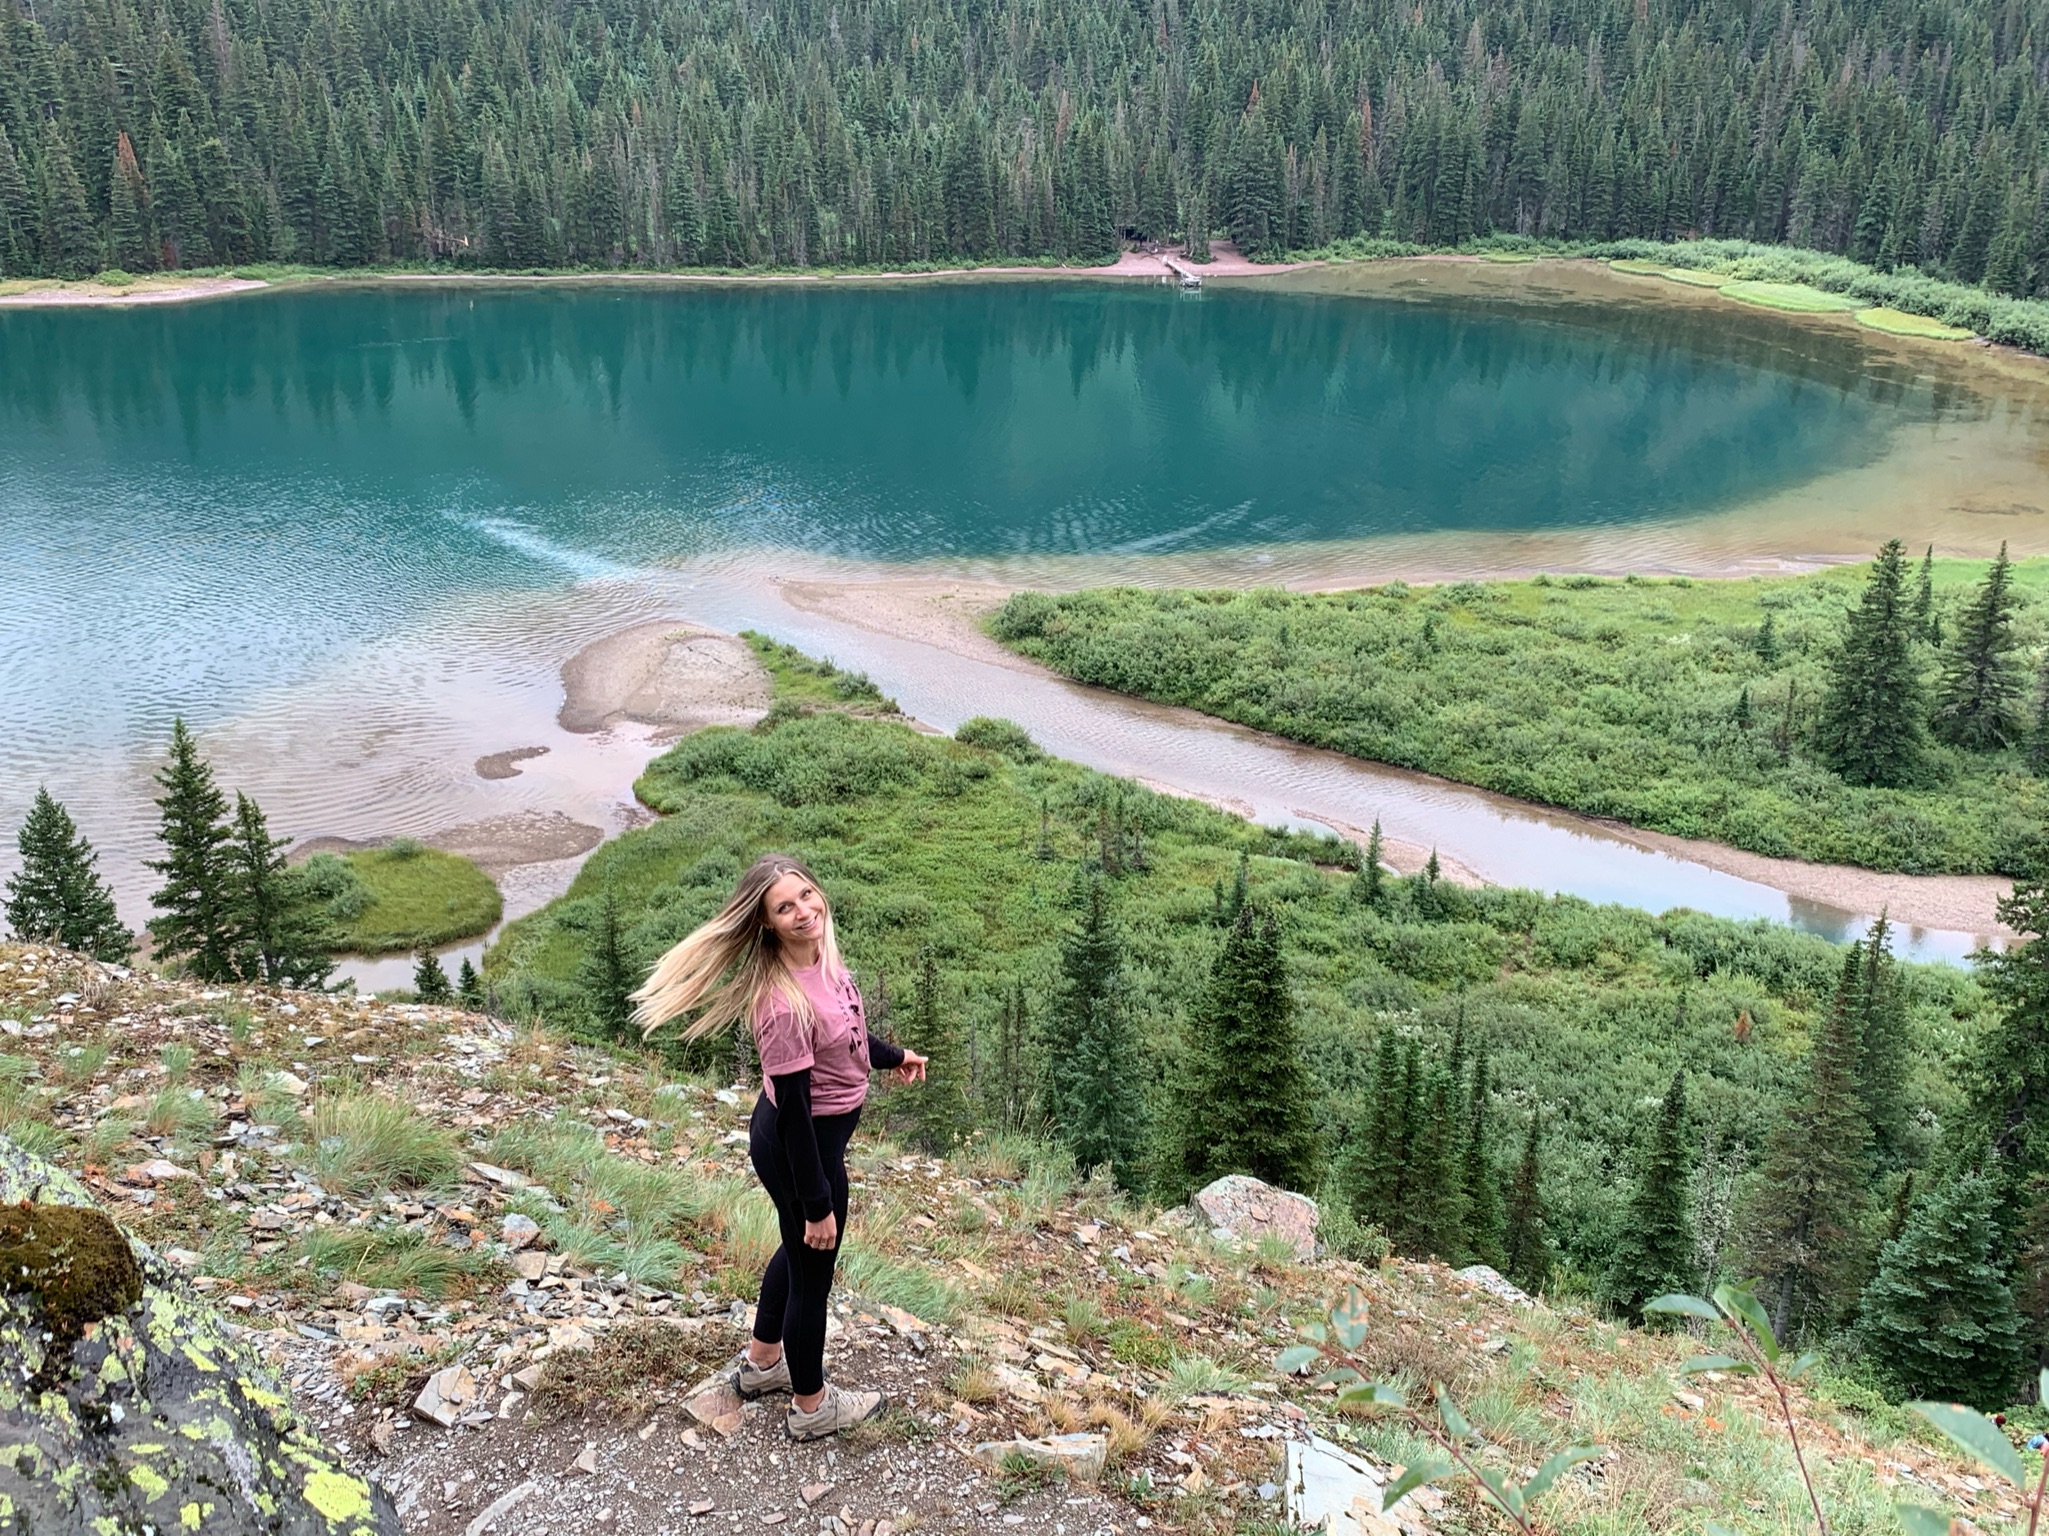 Montana travel, things to do in Montana, traveling to Montana, solo trip to glacier national park, solo trip to Glacier, Toni Wheel, Awheelinthesky.com, Grinnell Glacier Hike, Montana, visiting Glacier NAtional Park, solo trip to Montana, best hikes, lake, glacier,